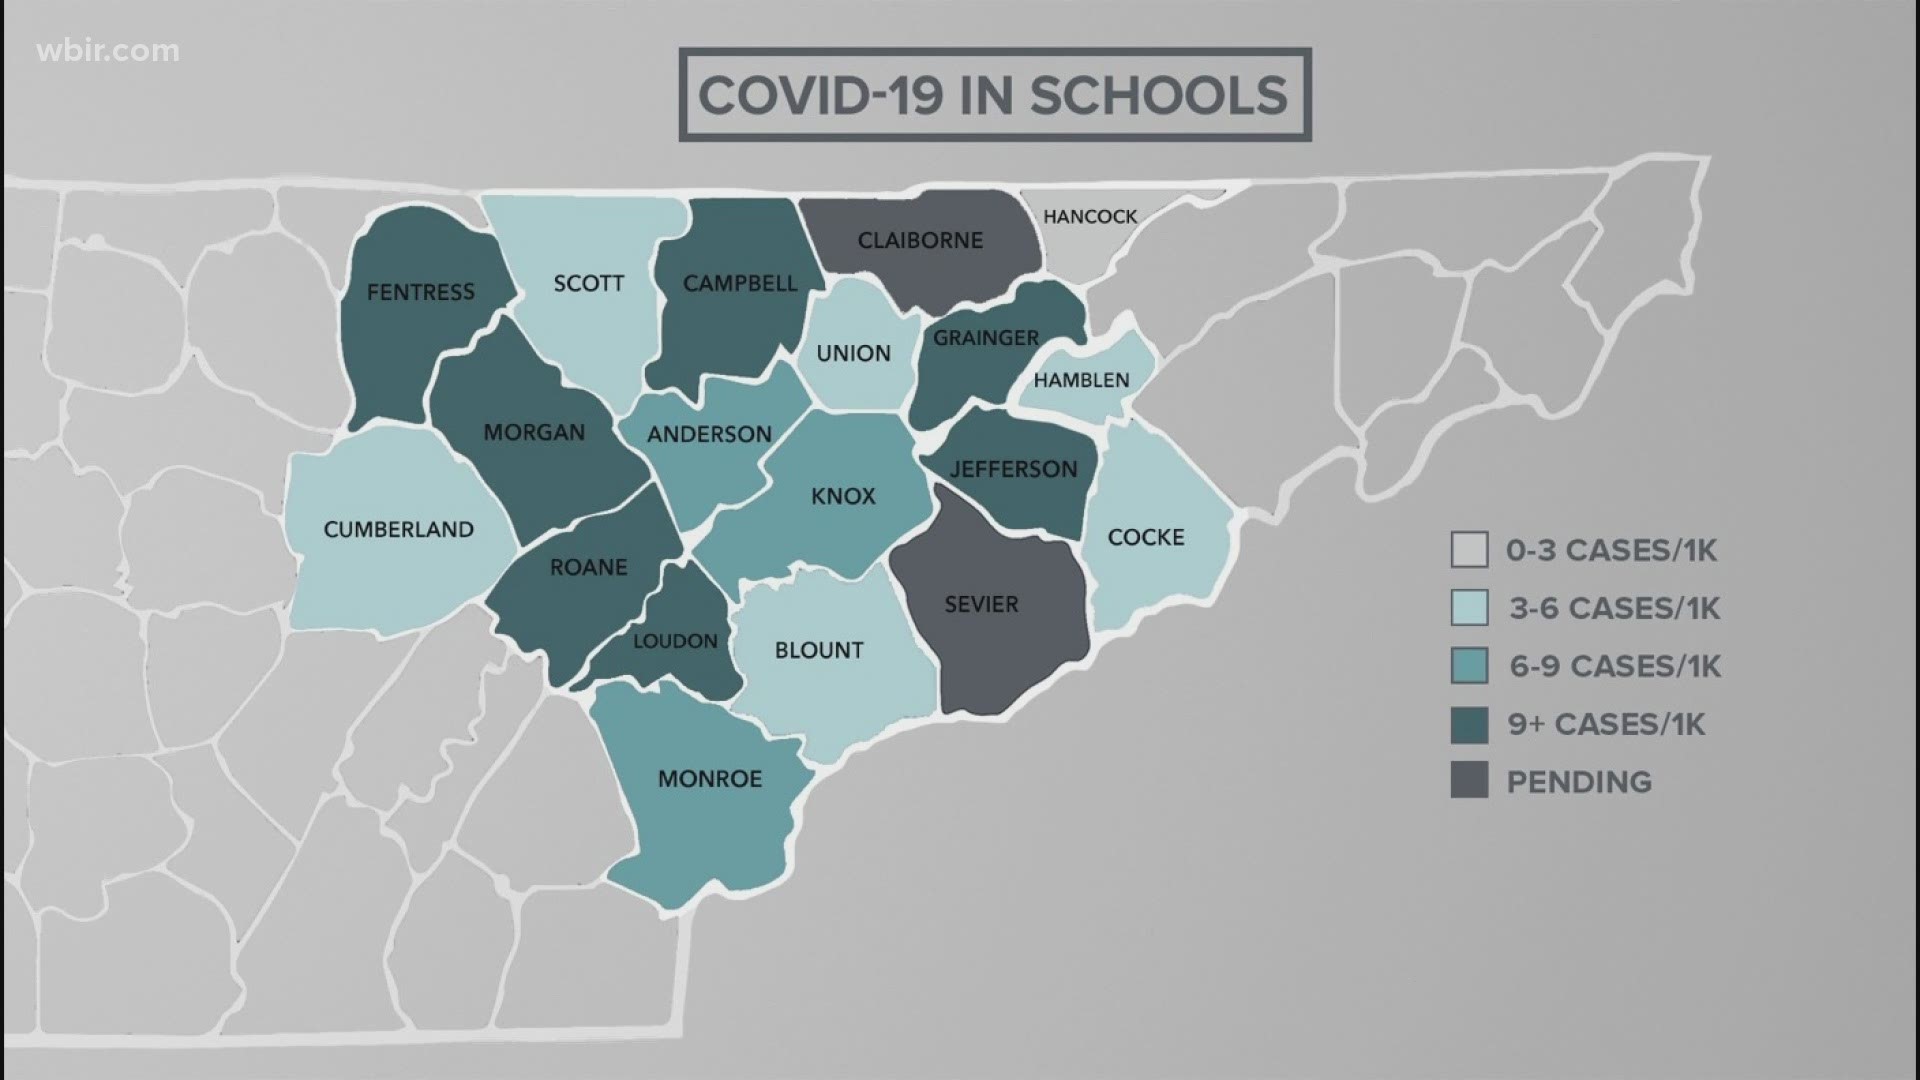 As of Friday, more than 1,350 cases of COVID-19 have been confirmed at several schools across East Tennessee.